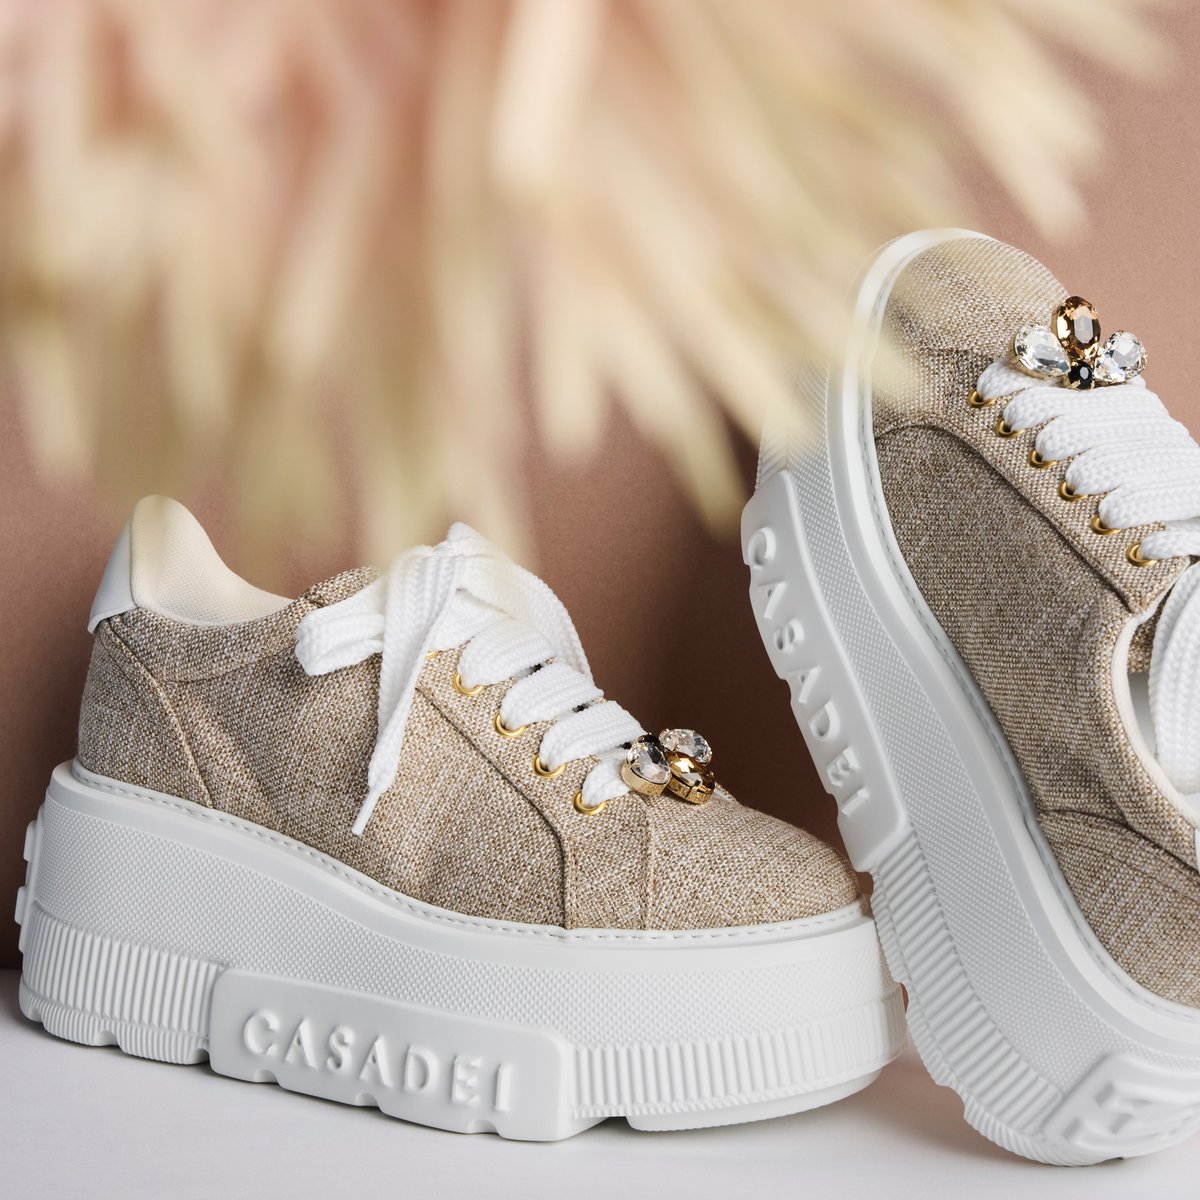 Bringing a sophisticated touch to urban style with the Casadei sneaker selection. #CasadeiWorld casadei.com/en/new-arrival…